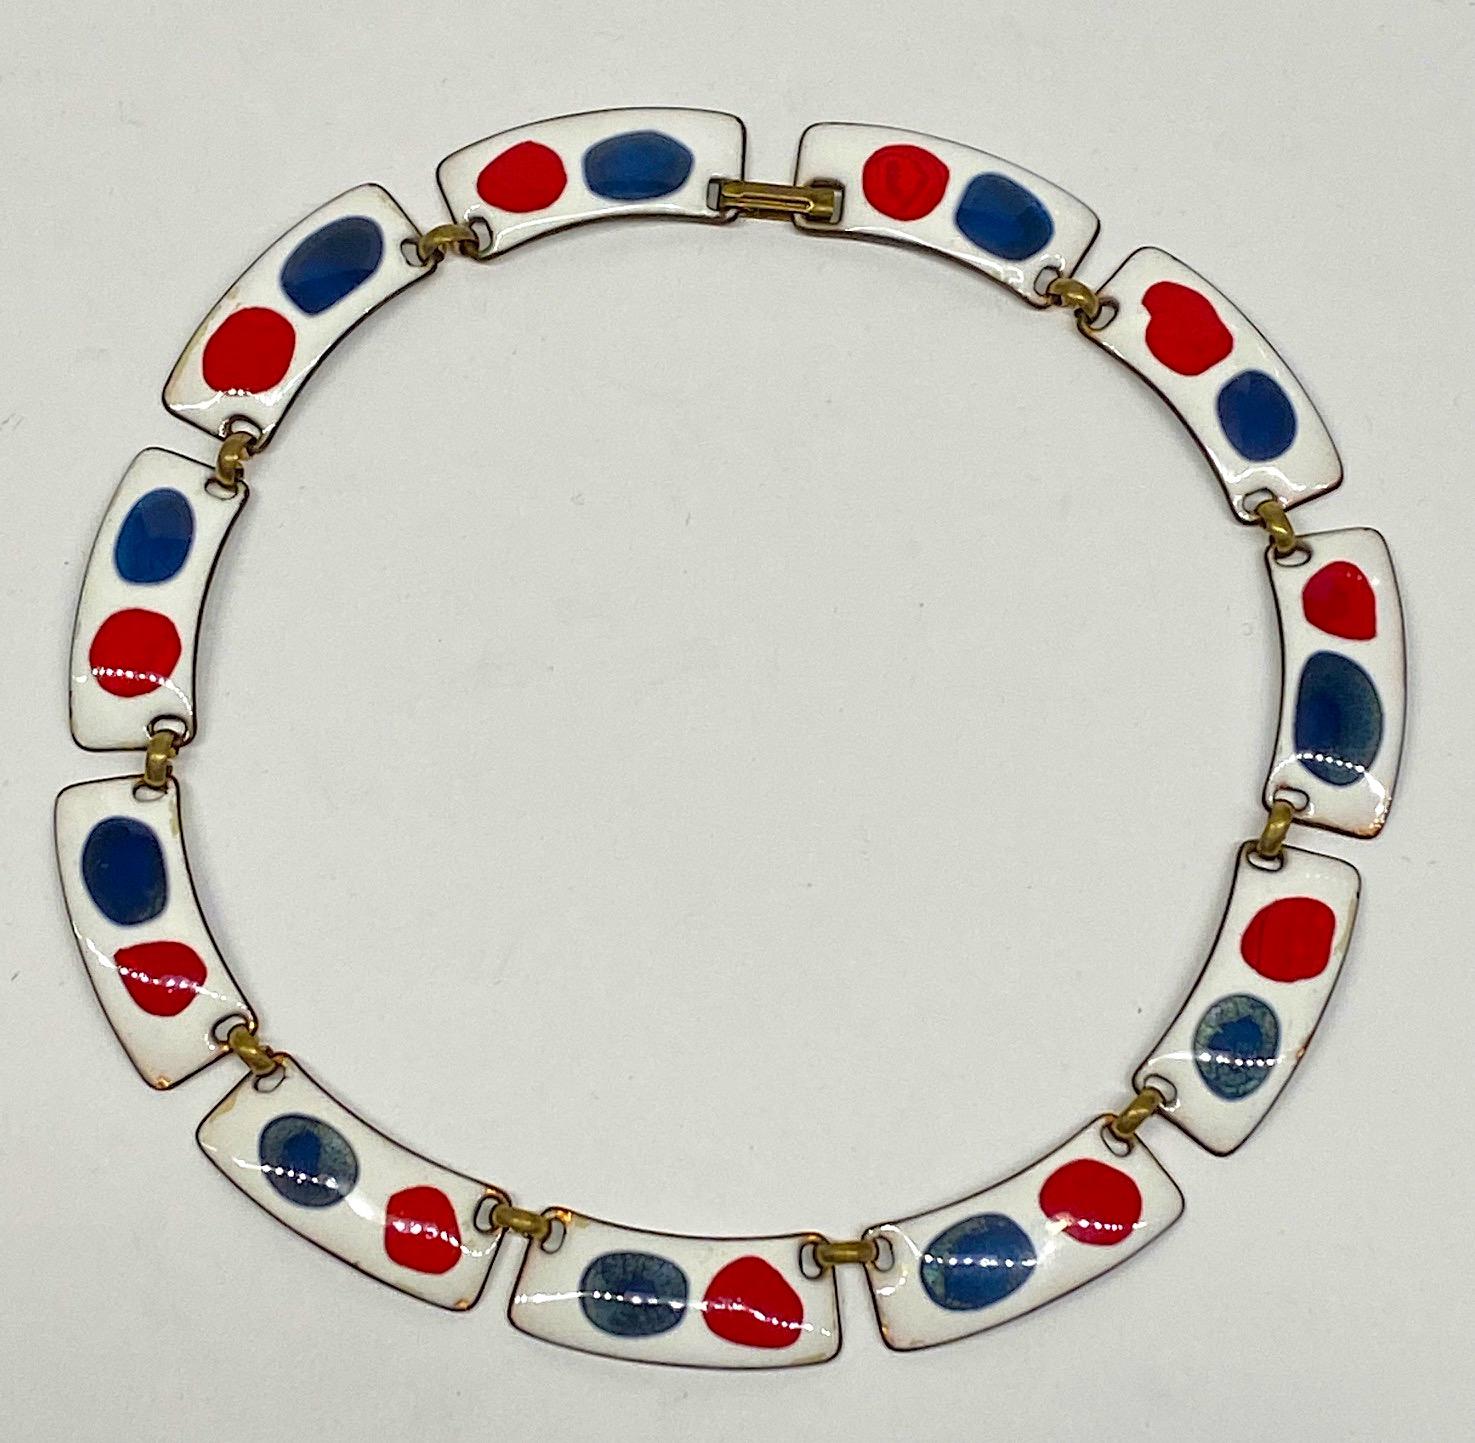 A lovely and cheerful red and blue on white enamel on copper necklace by artisan jeweler Kay Denning from the 1960s. Each of the eleven links are lightly curved to make a perfect circle when worn around the neck. Each link is .5 of an inch wide, 1.5